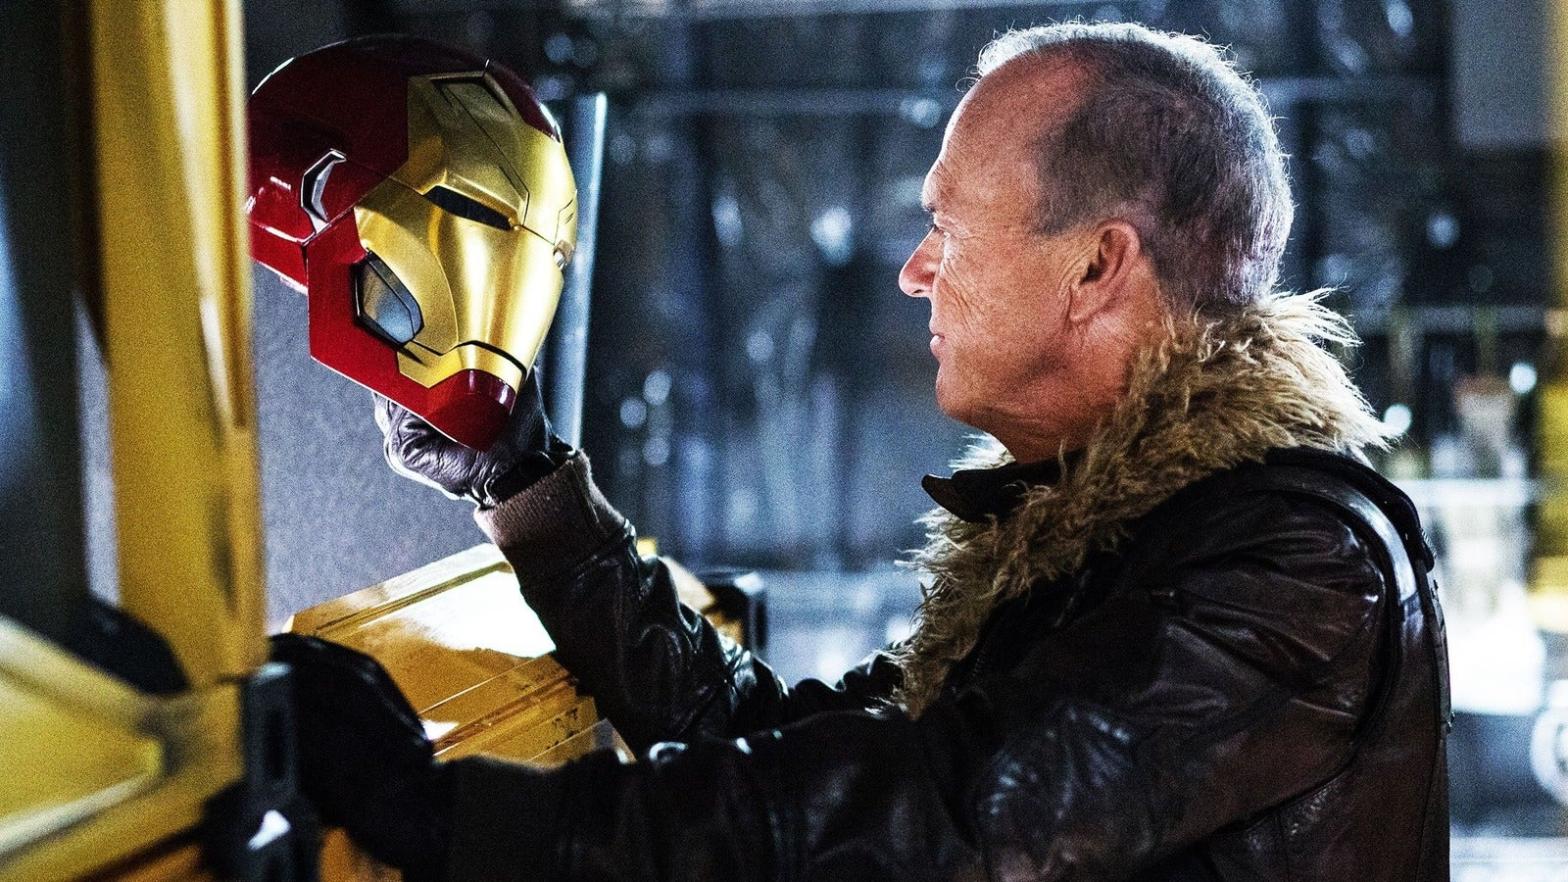 Michael Keaton filmed new scenes as Vulture this week. (Image: Sony Pictures)